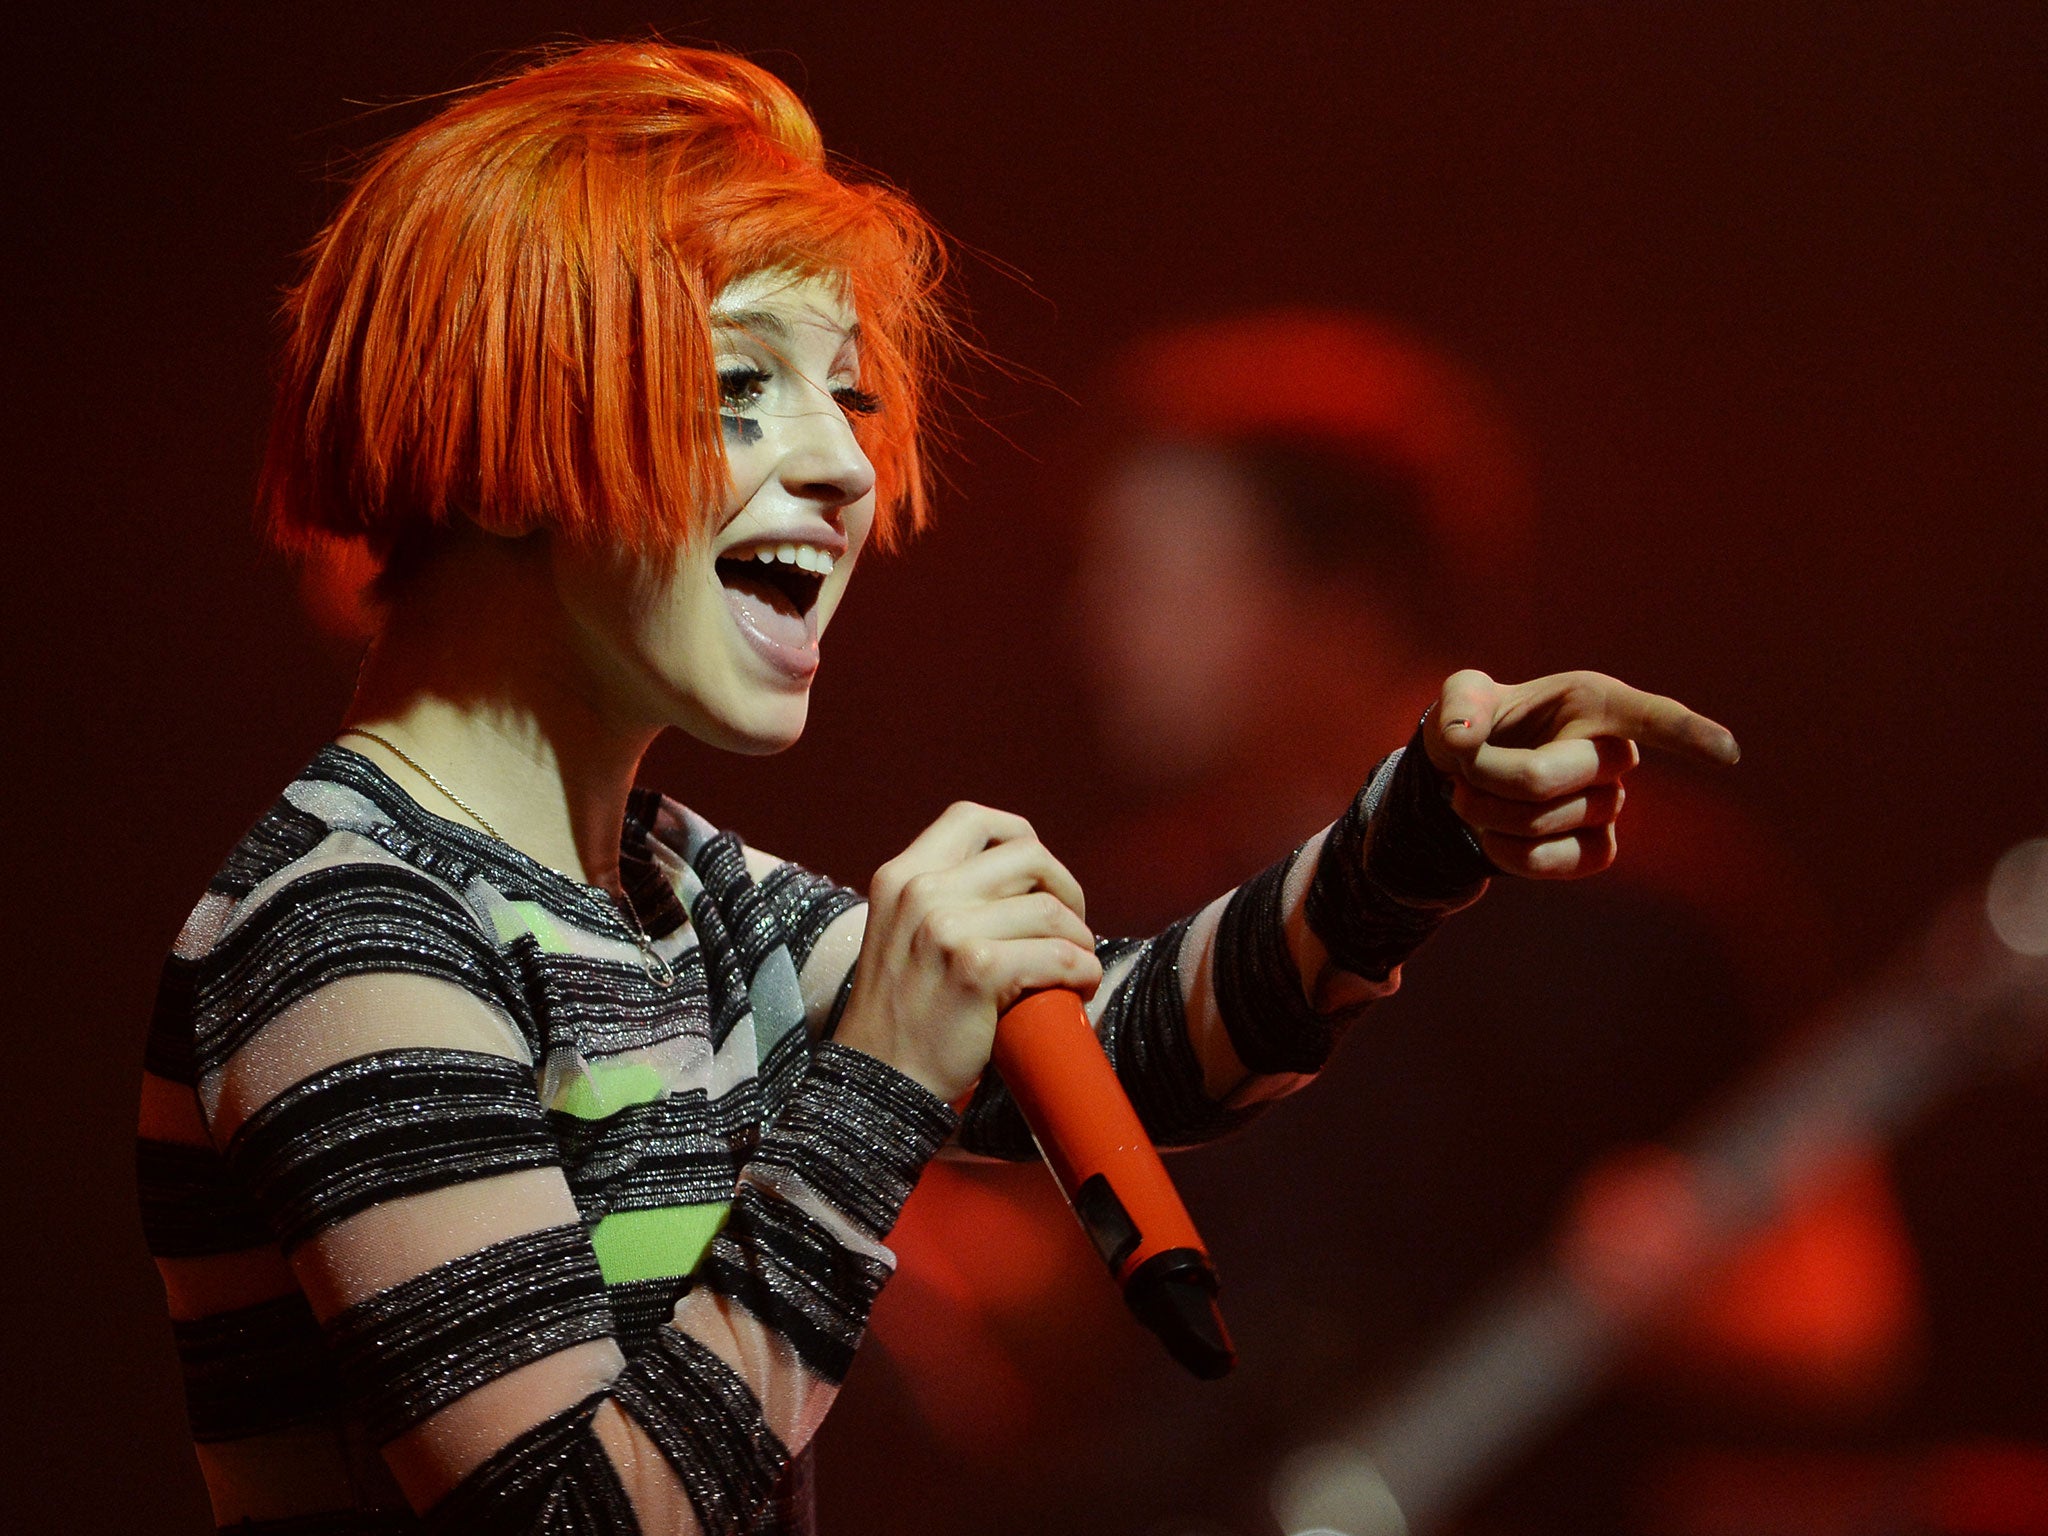 Hayley Williams performs with Paramore in New York earlier this year